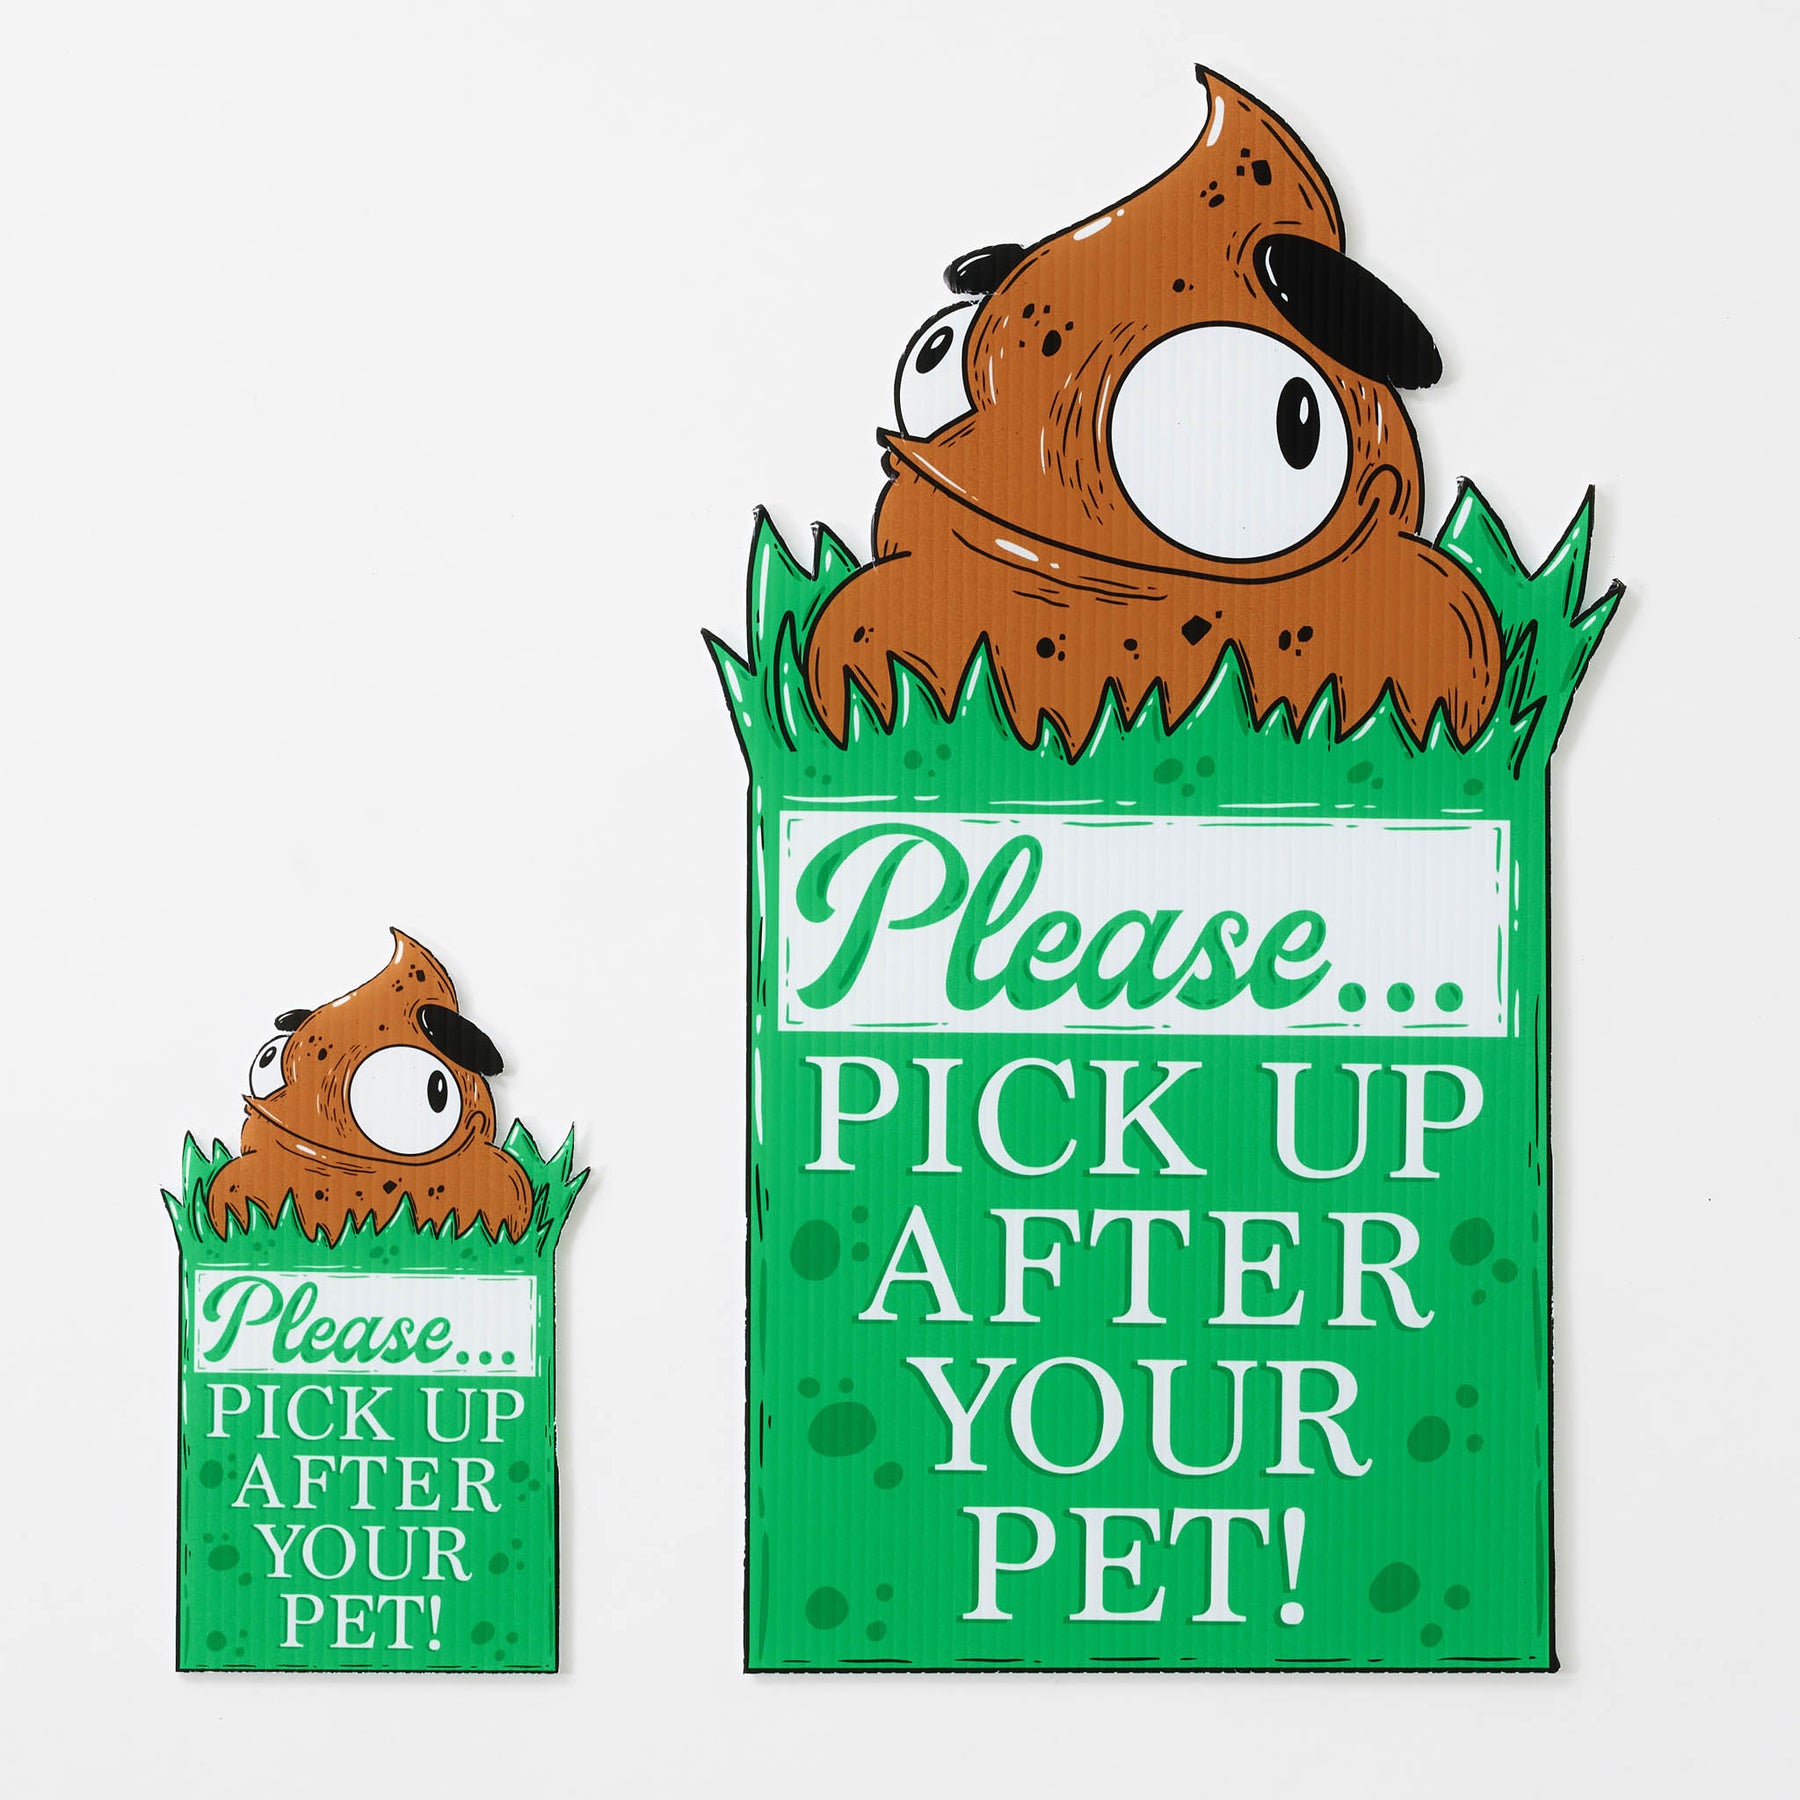 The Stranger | "Pick Up After Your Pet" Yard Sign